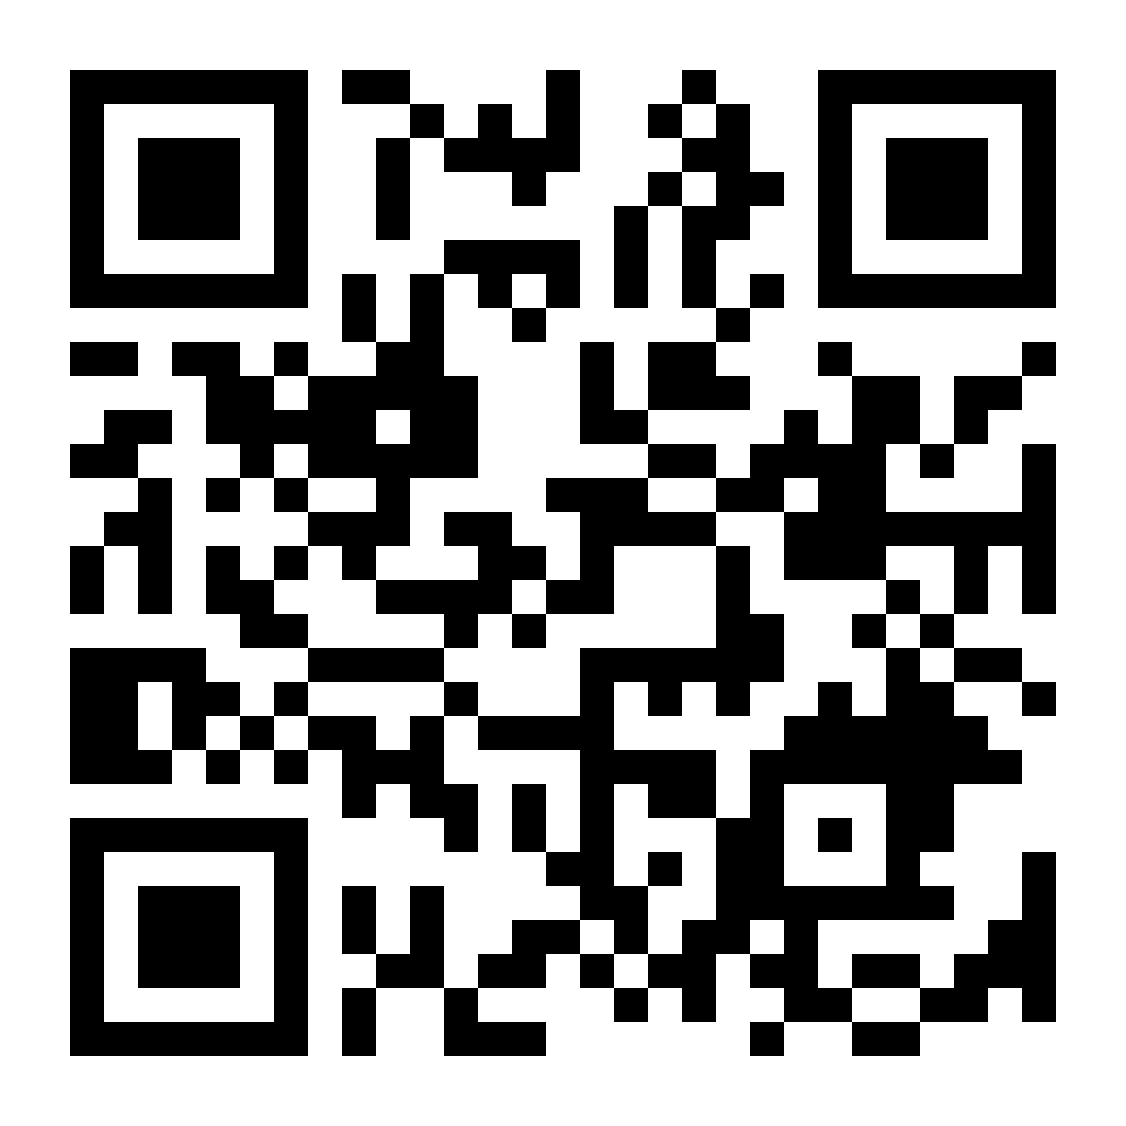 QRcode_SitoFR_hp